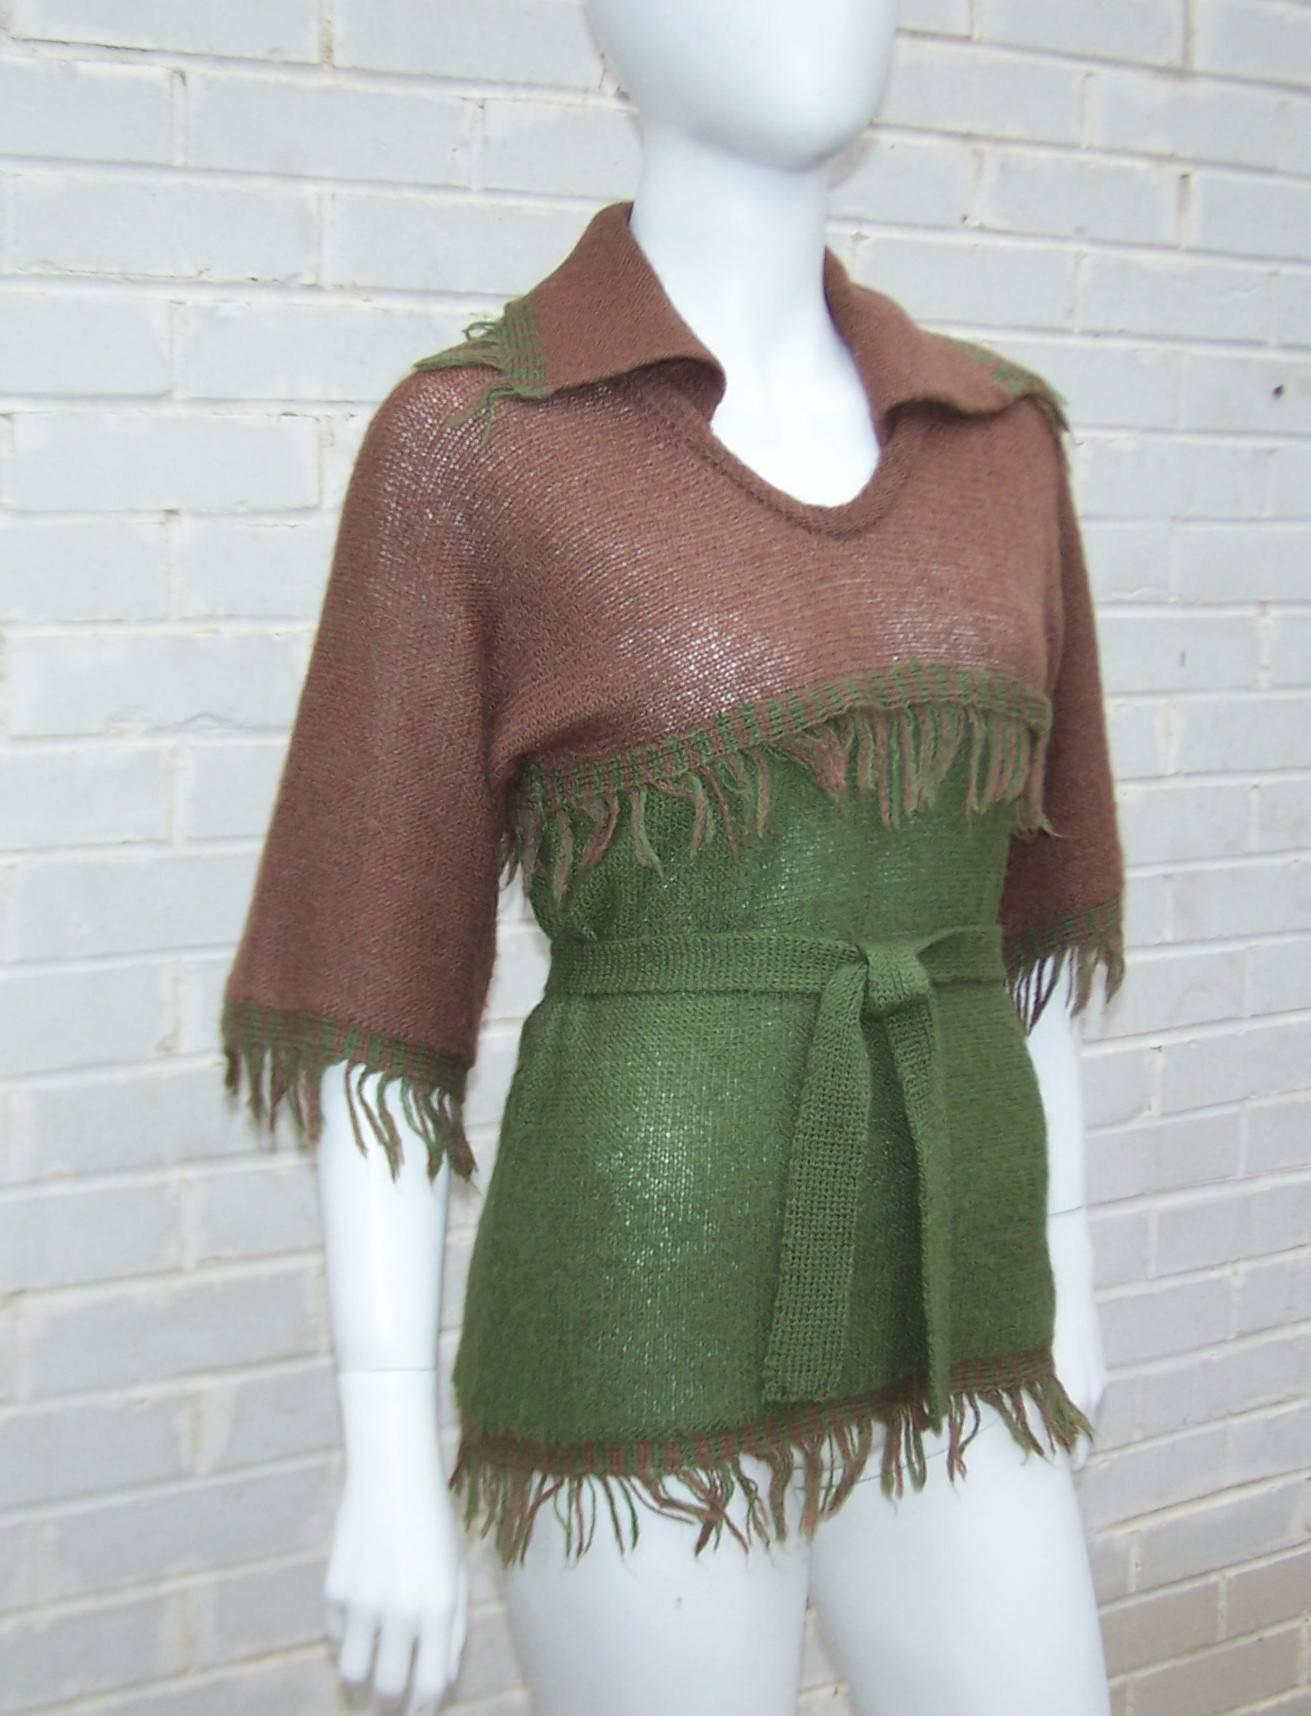 Look like a modern day Robin Hood in this C.1970 La Squadra wool knit pullover top with coordinating belt.  The two tone top is olive green and light brown with fun 2